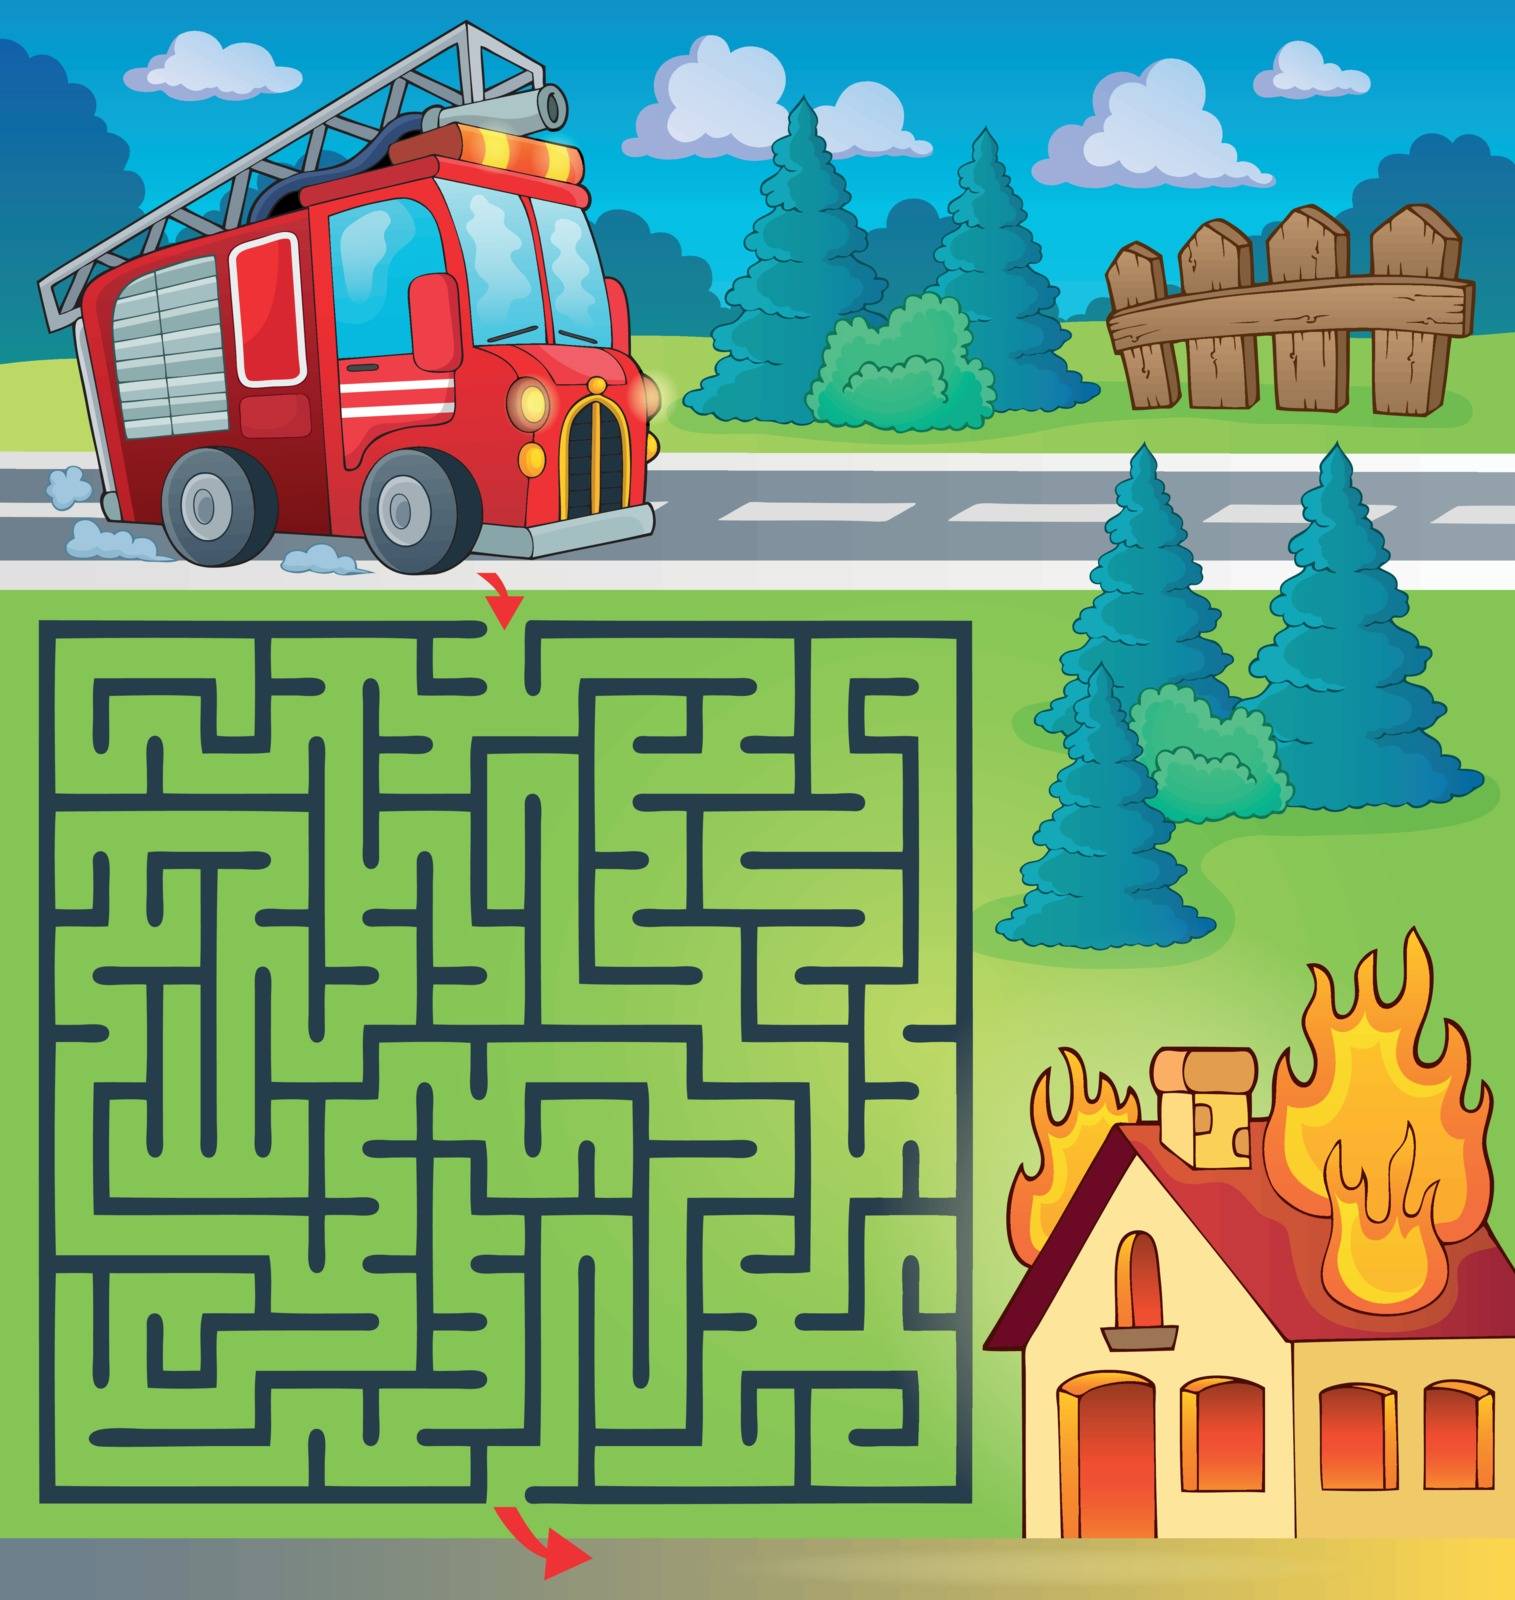 Maze 3 with fire truck theme - eps10 vector illustration.